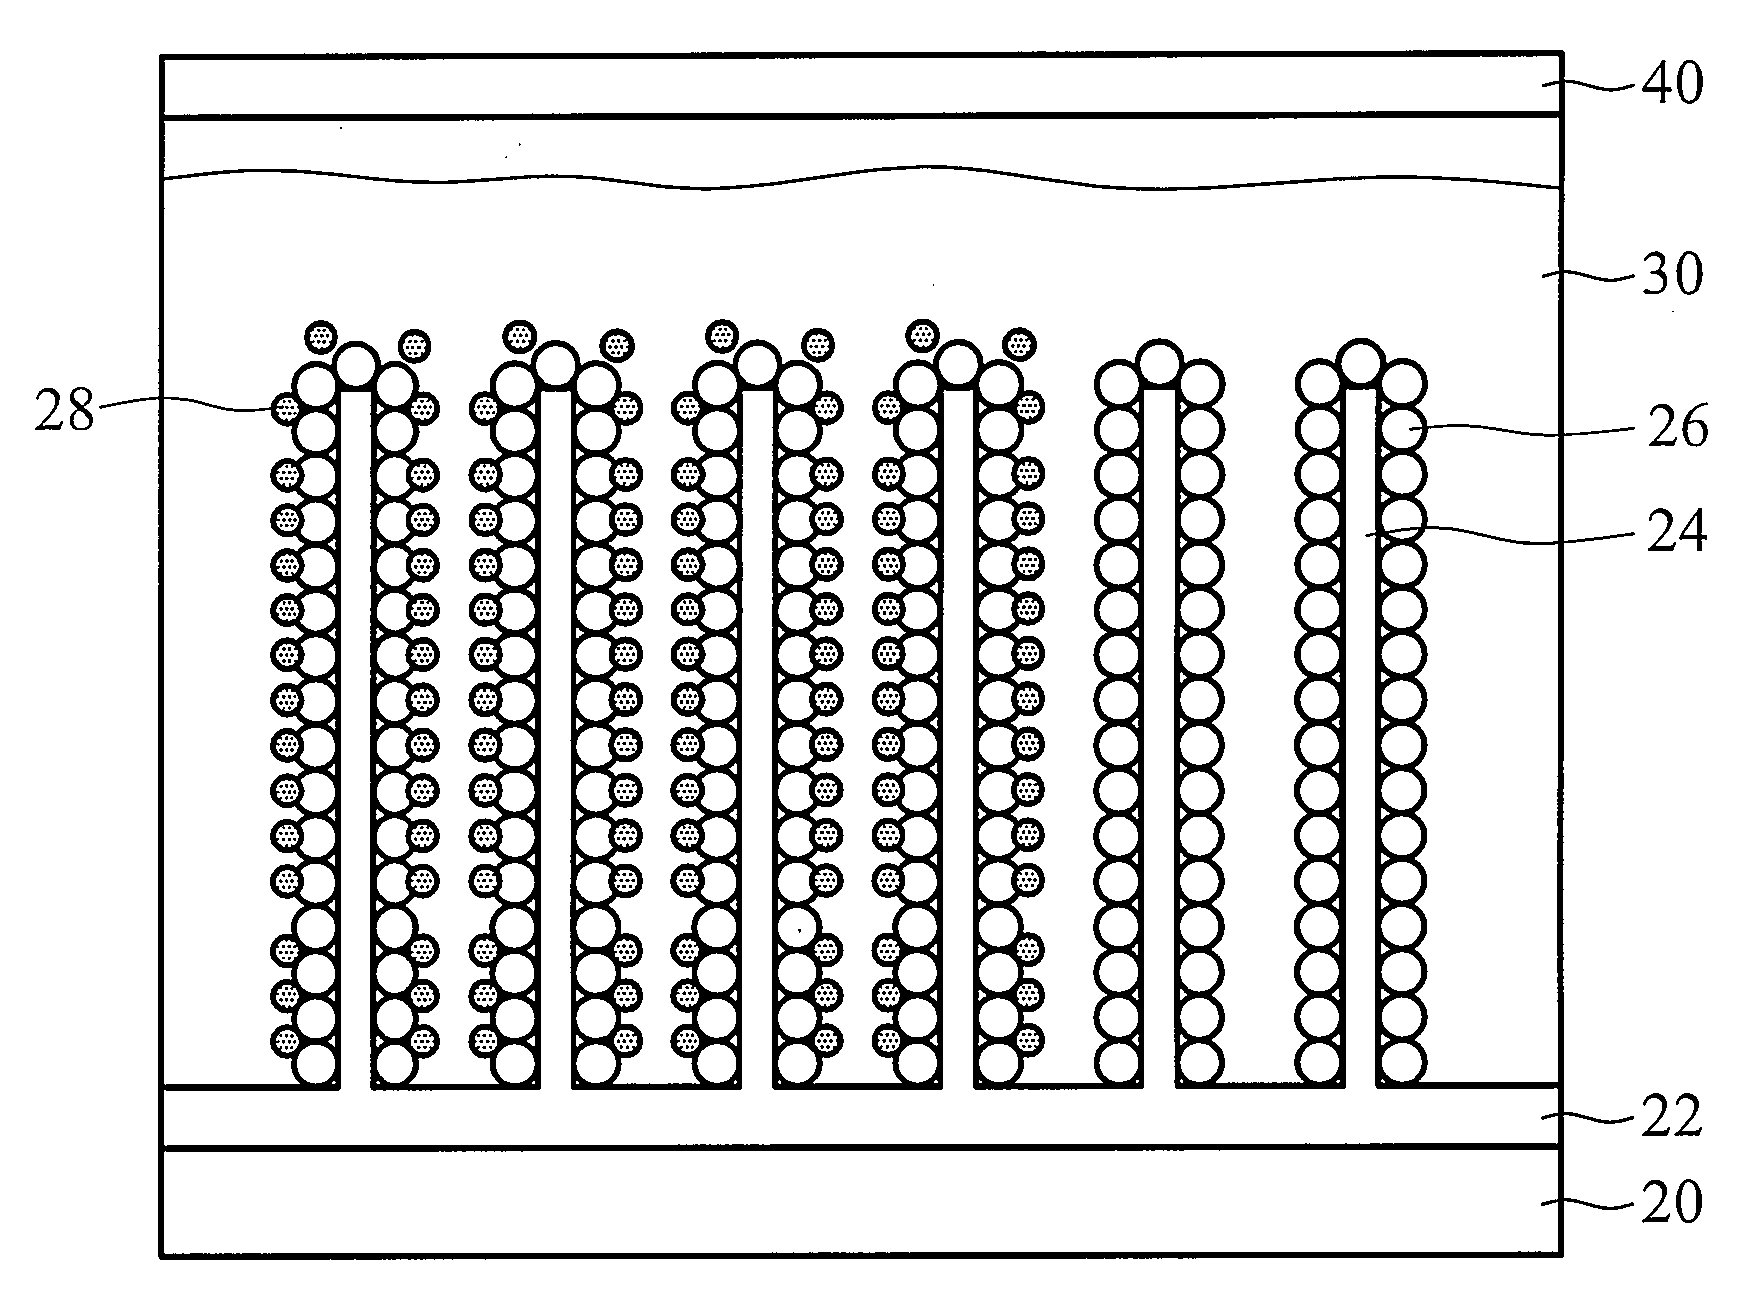 Dye-sensitized solar cells and method for fabricating same